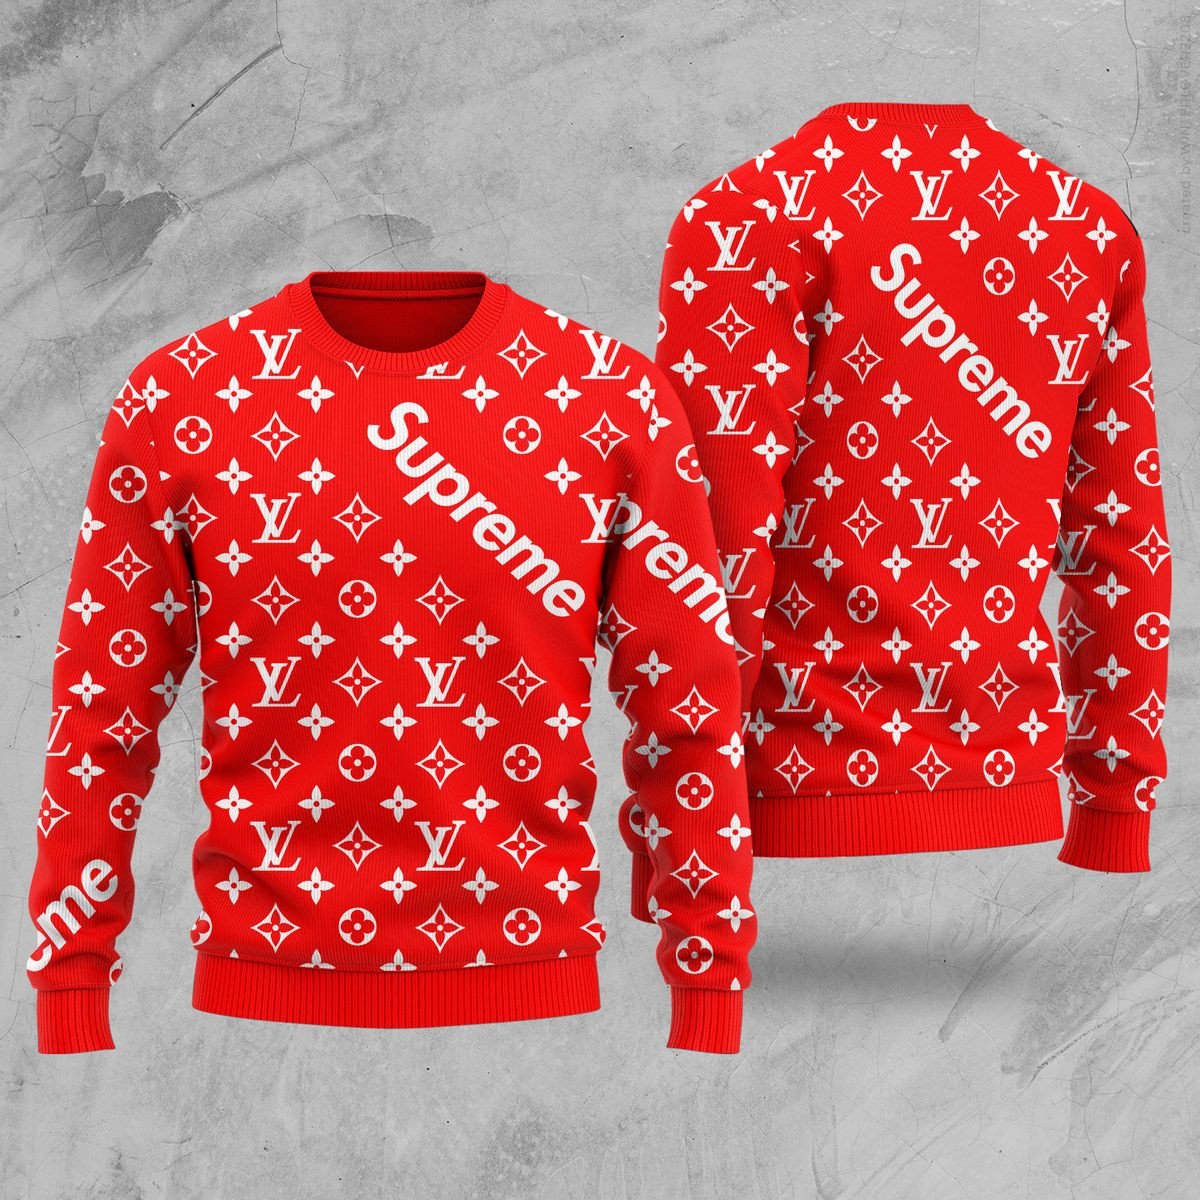 LIMITED Supreme Louis Vuitton ugly Christmas sweater 1